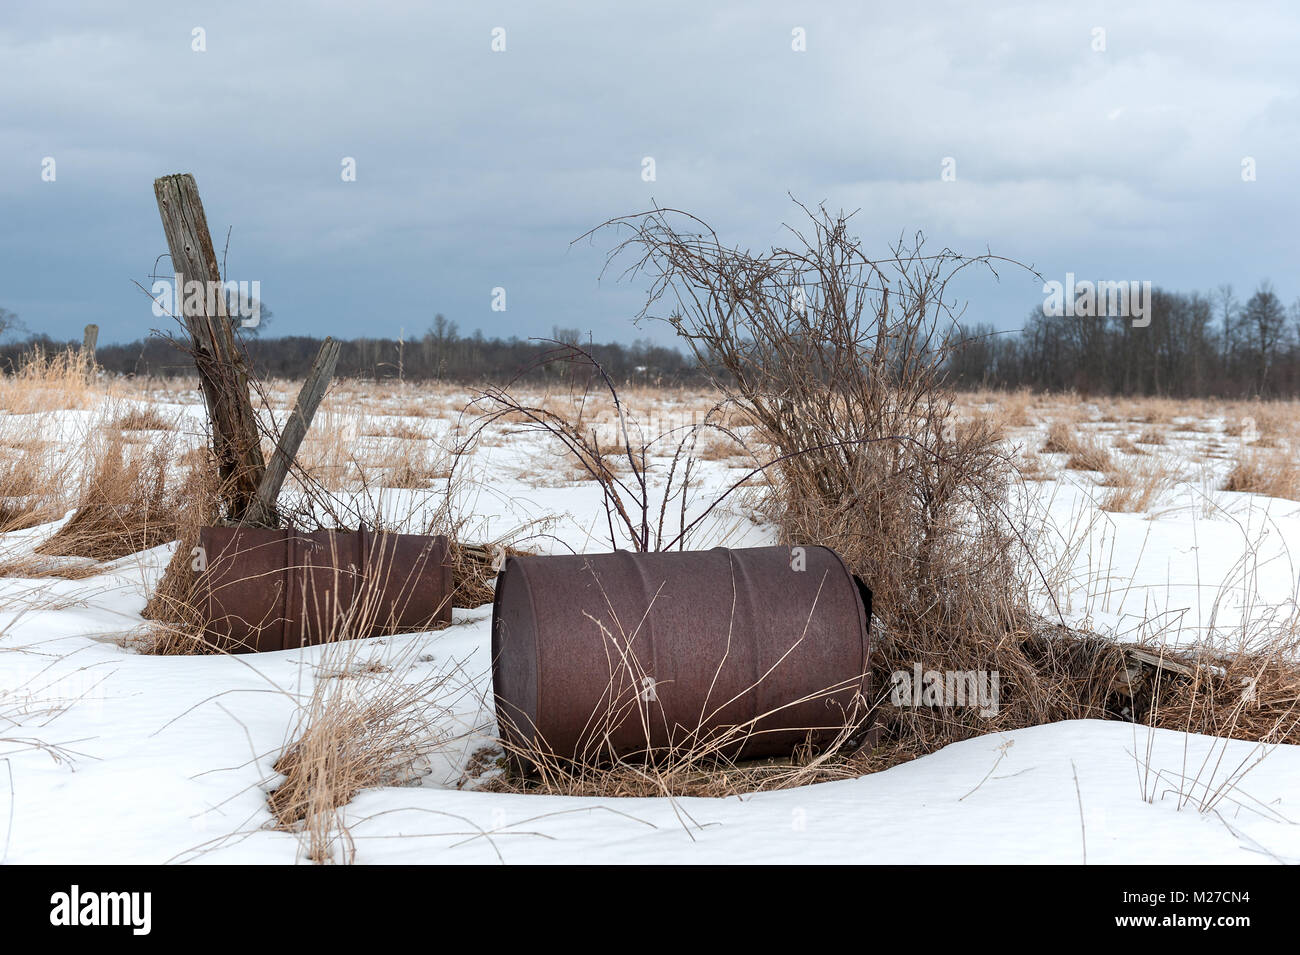 Rusting abandoned oil barrels in snow covered farm. Stock Photo